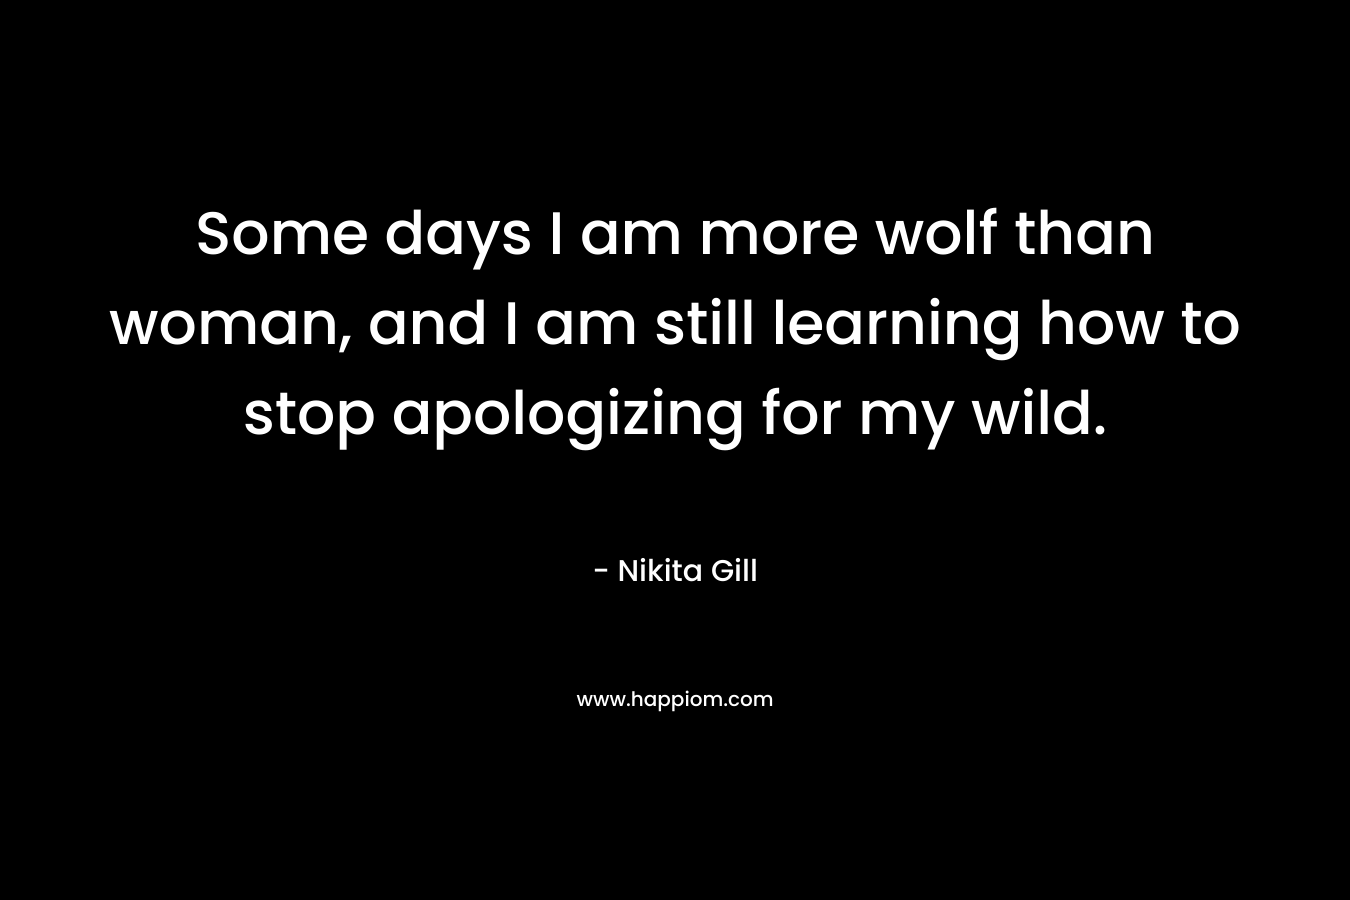 Some days I am more wolf than woman, and I am still learning how to stop apologizing for my wild.